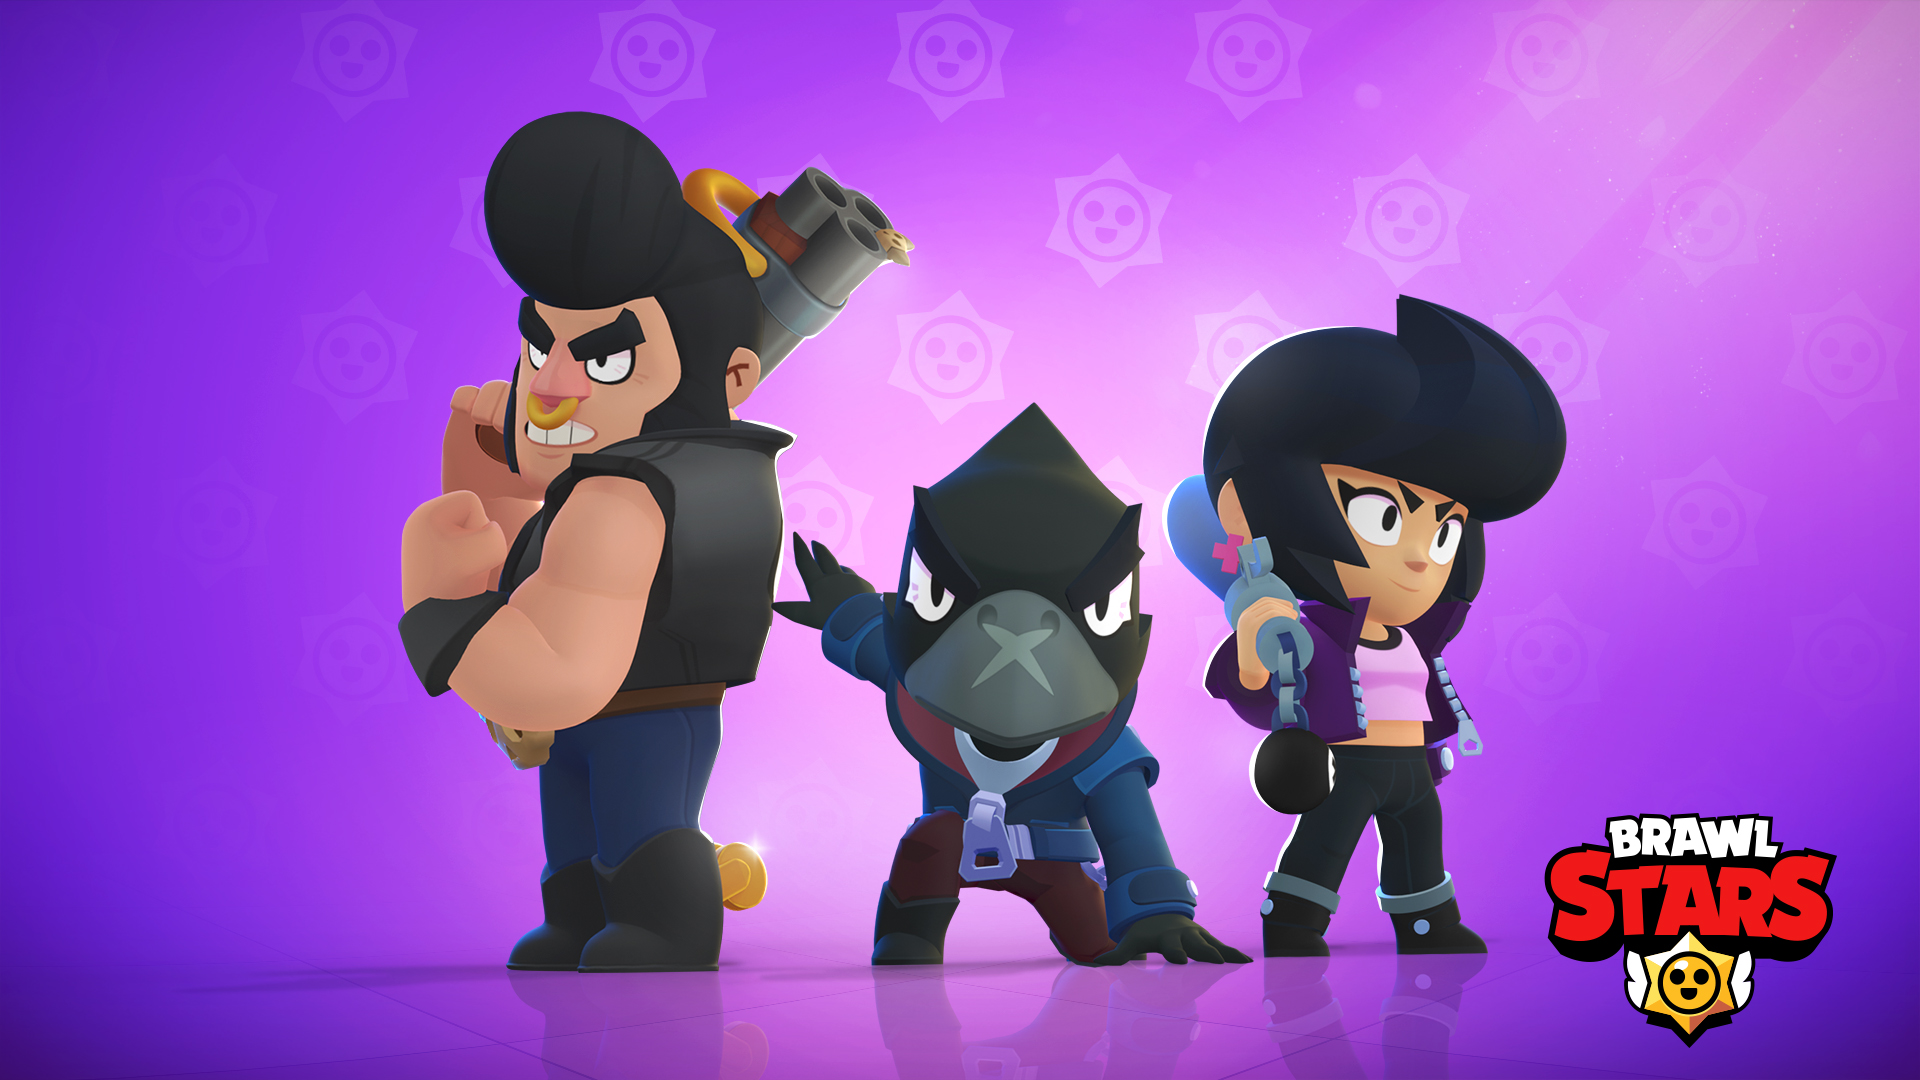 Brawl Stars Sur Twitter We Know Playing With Randoms Can Be Tough Sometimes So How About Trying Something Different Today Comment Below 1 Your Total Trophies 2 - compte développeur brawl stars